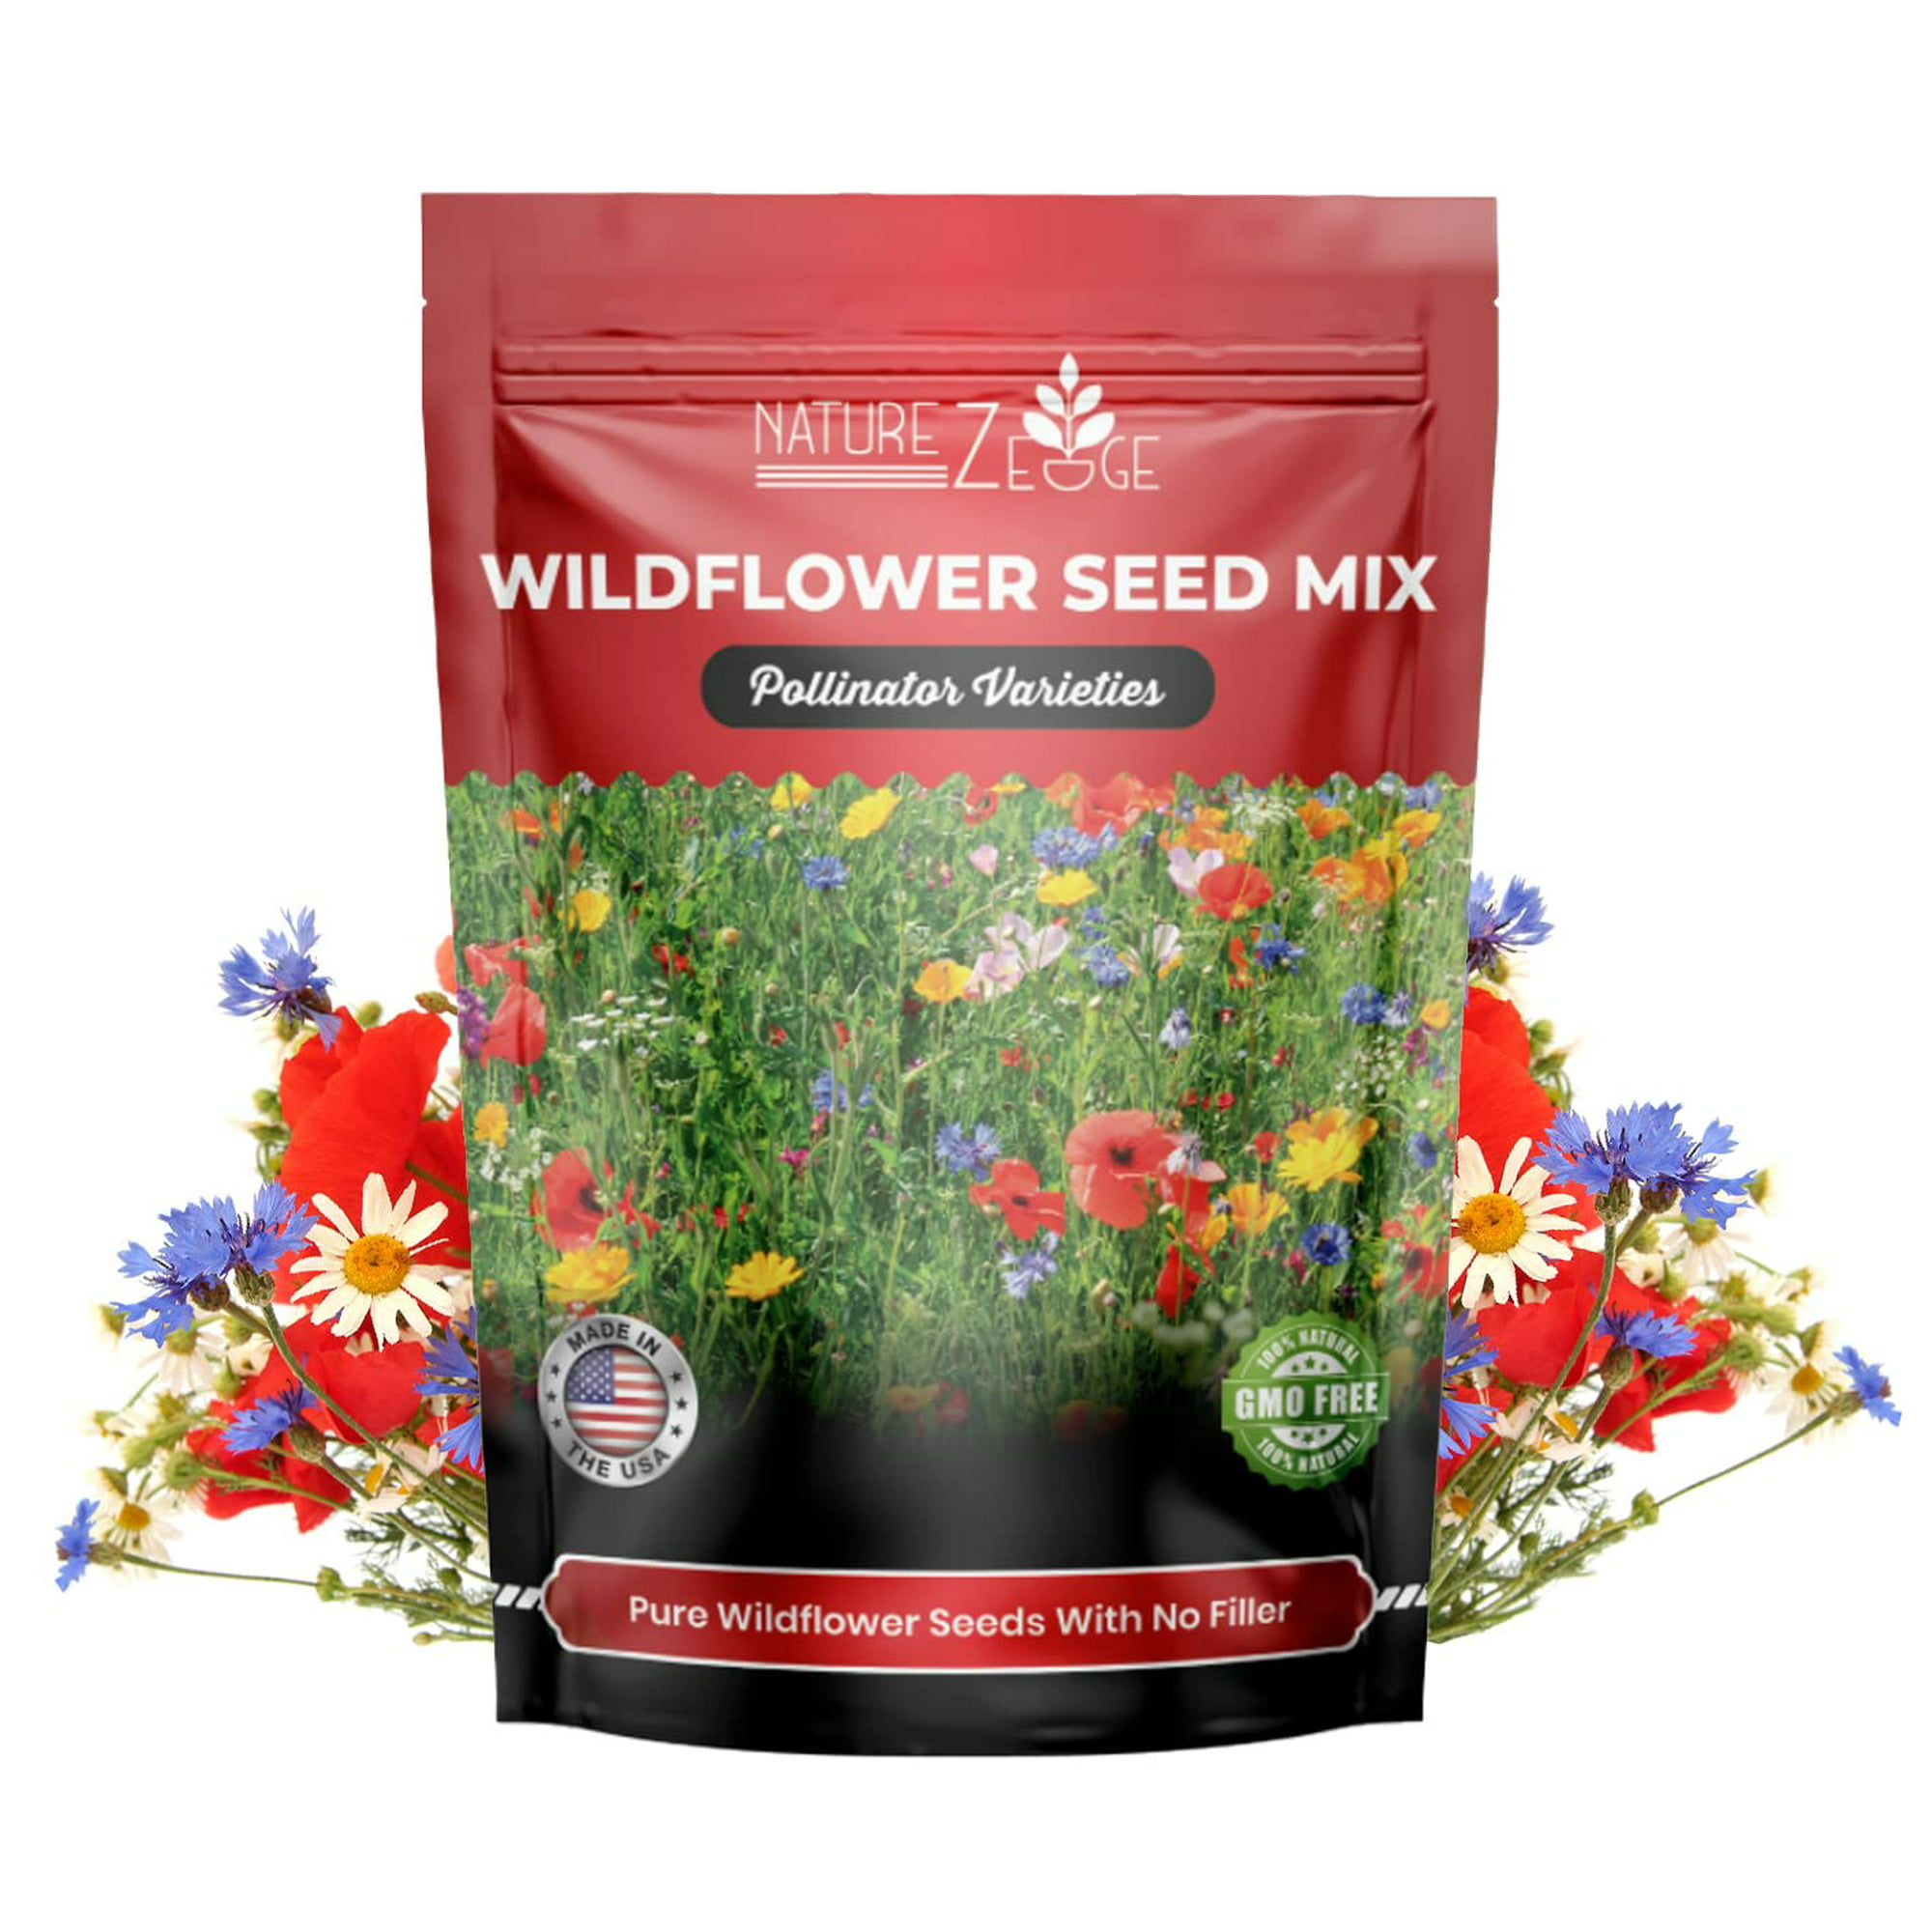 Set of 25 Flower Seed Packets Including 10 Or More Varieties Forget Me  Nots, Pinks, Marigolds, Zinnia, Wildflower, Poppy, Snapdragon and More -  DIY Tool Supply